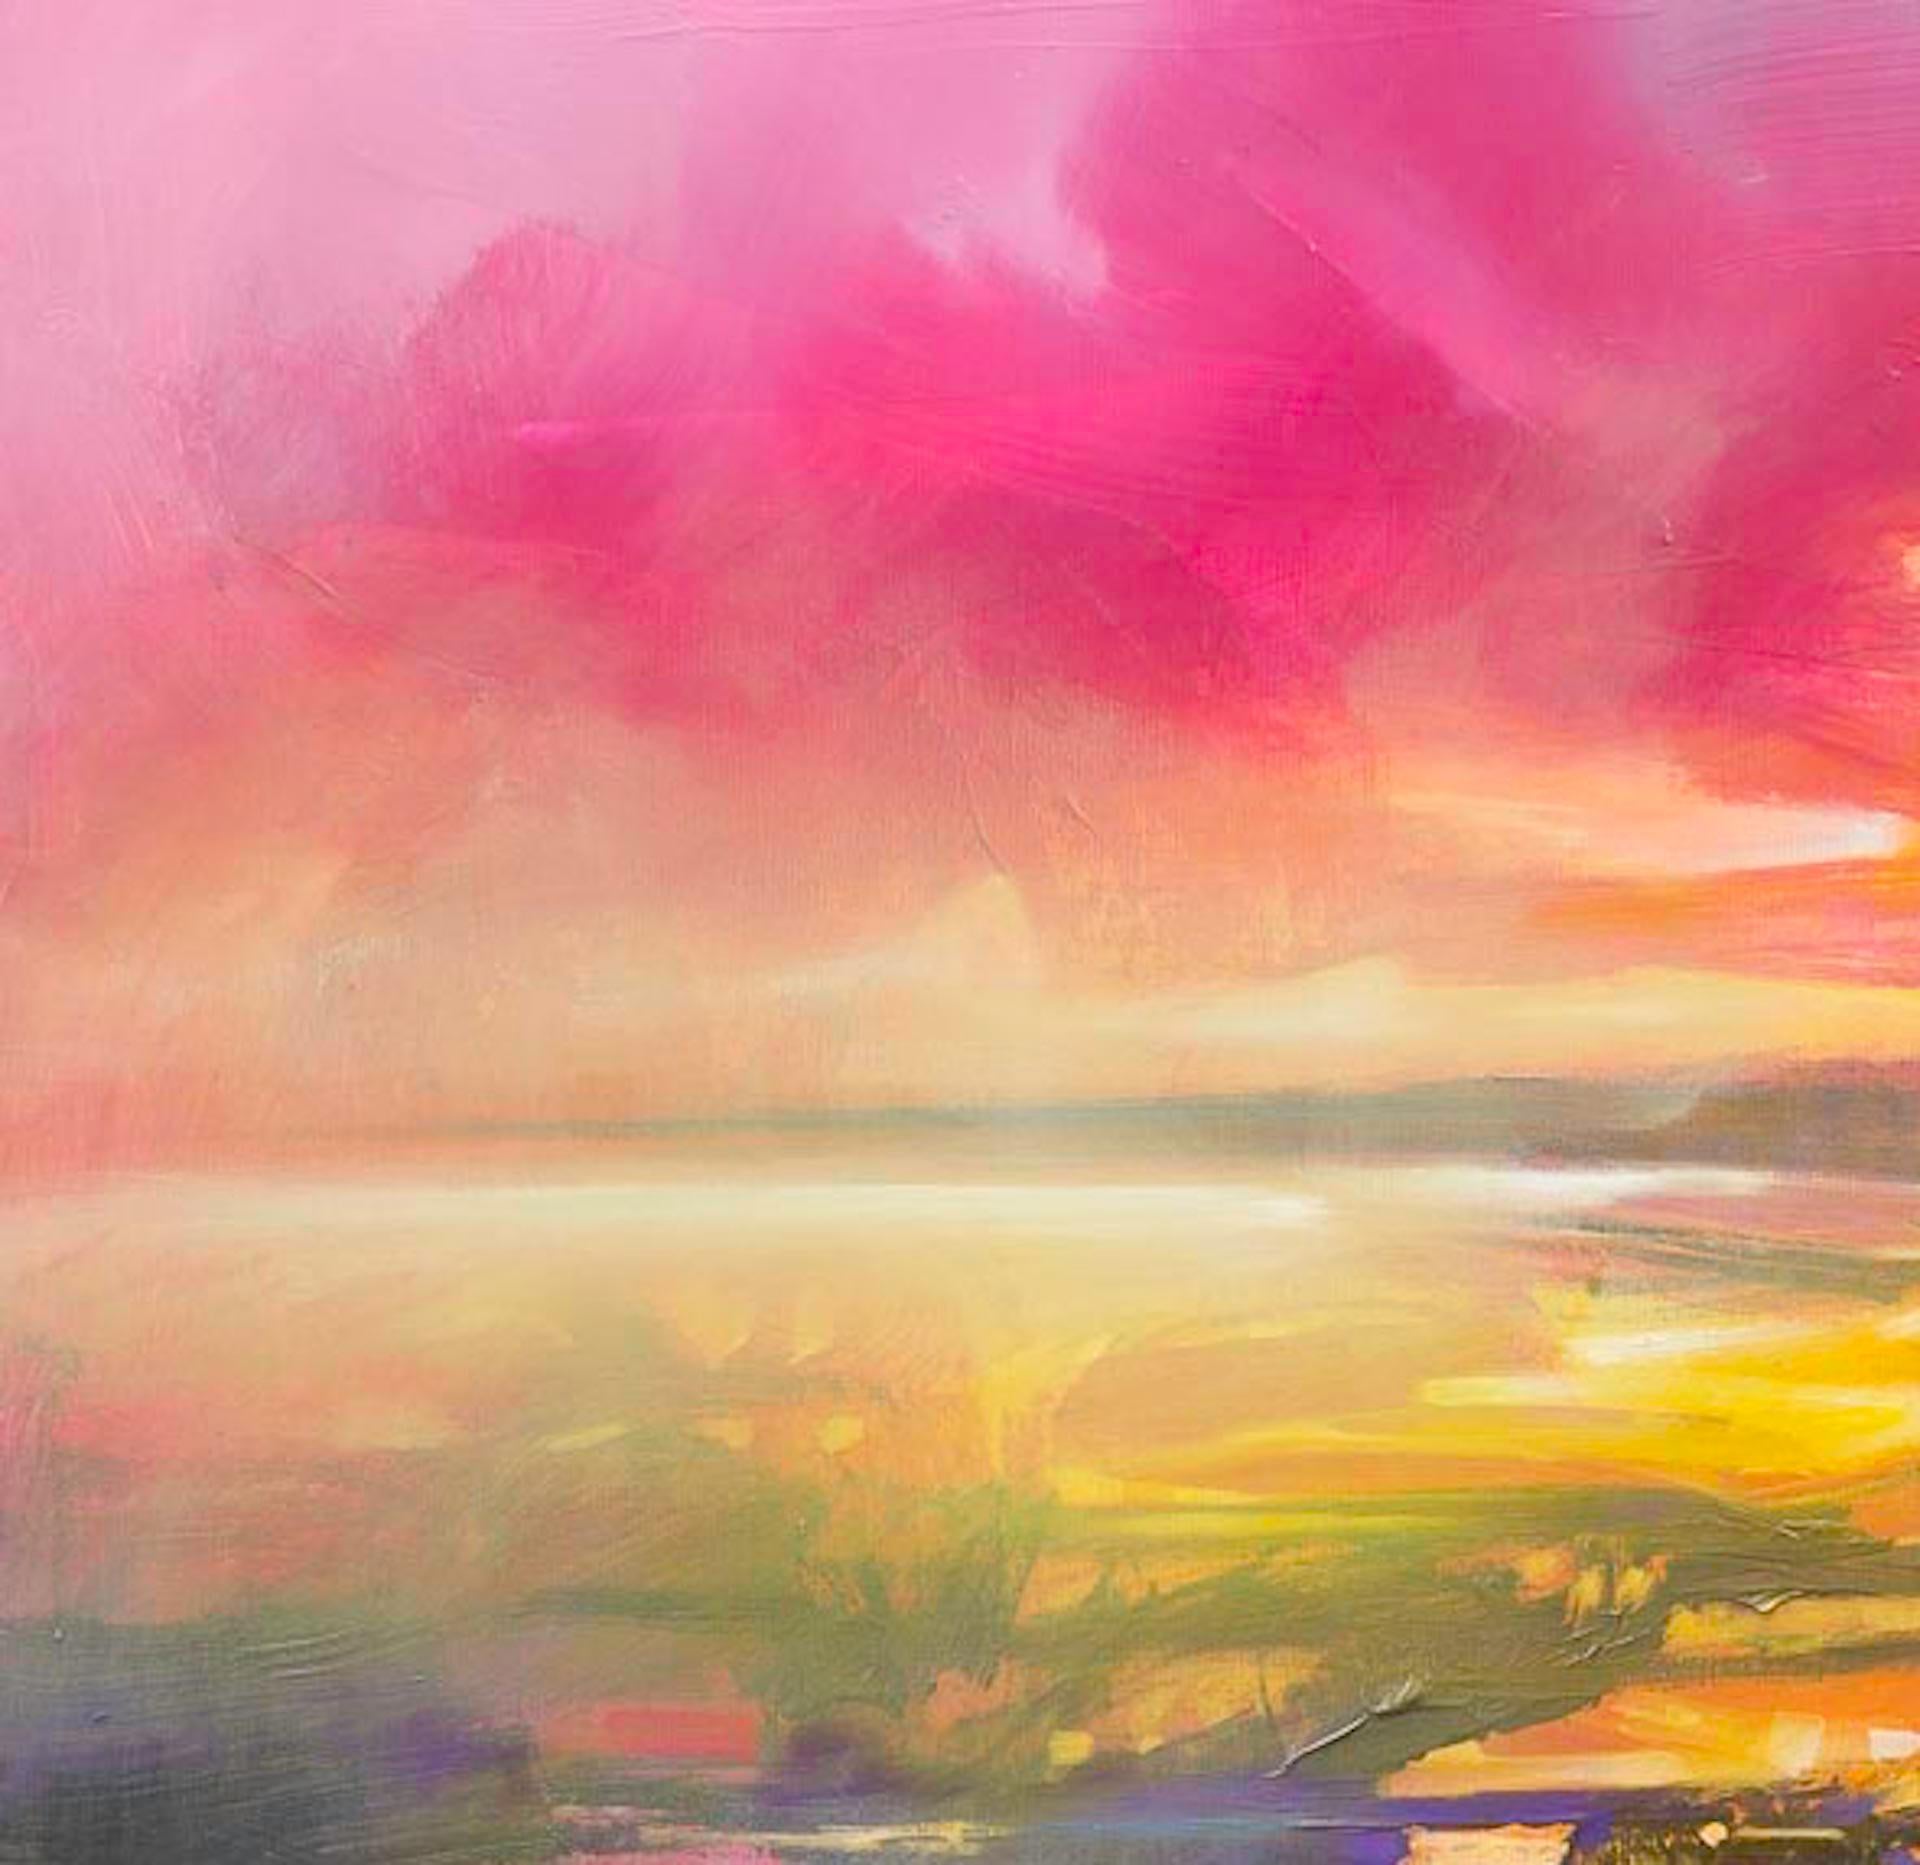 Scott Naismith
Fragments From Above
Original Mixed Media Painting
Oil Paint, Acrylic Paint and Spray Paint on Linen Canvas
Canvas Size: H 100cm x W 100cm x D 3cm
Framed Size: H 110cm x W 110cm x D 4.5cm
Painting has been signed by the artist, Scott